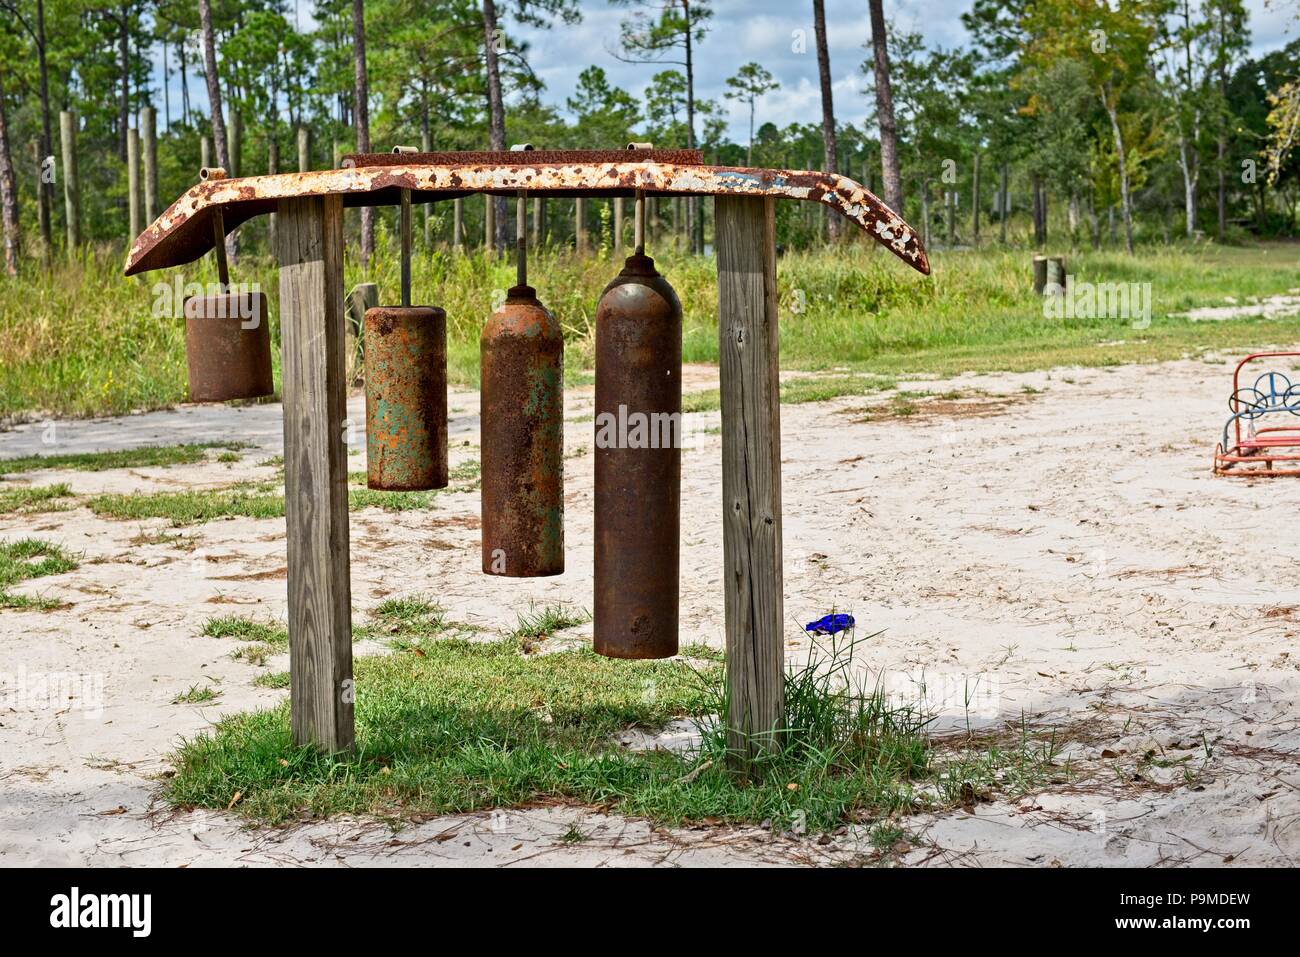 Huge homemade wind chimes made from cylinders hang outside in a wooded area Stock Photo